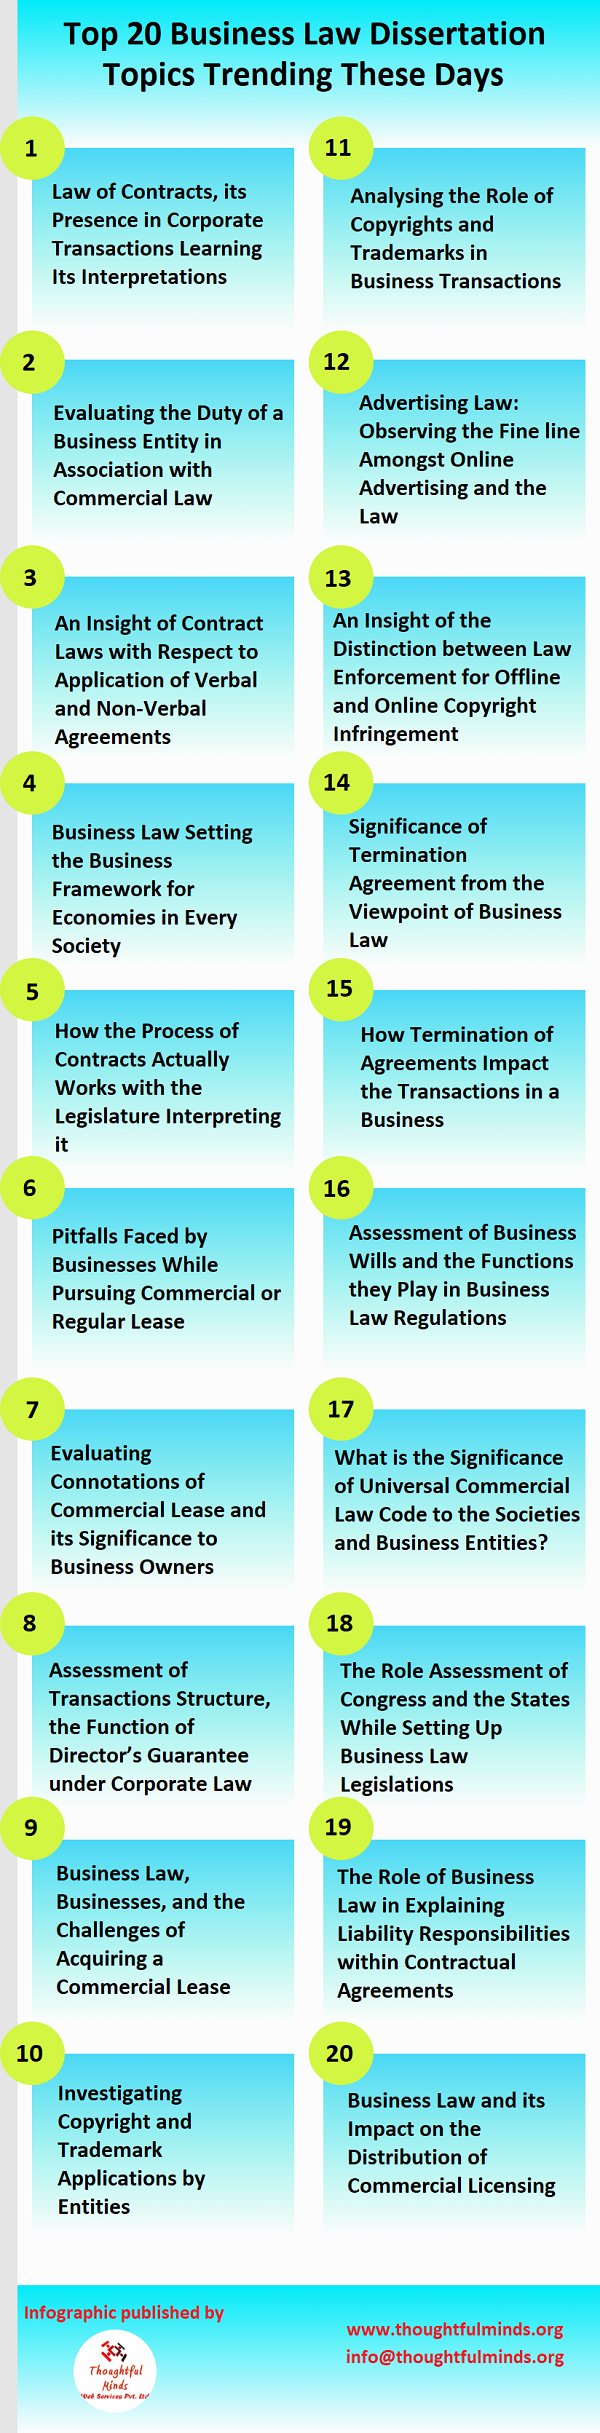 dissertation topics for business law